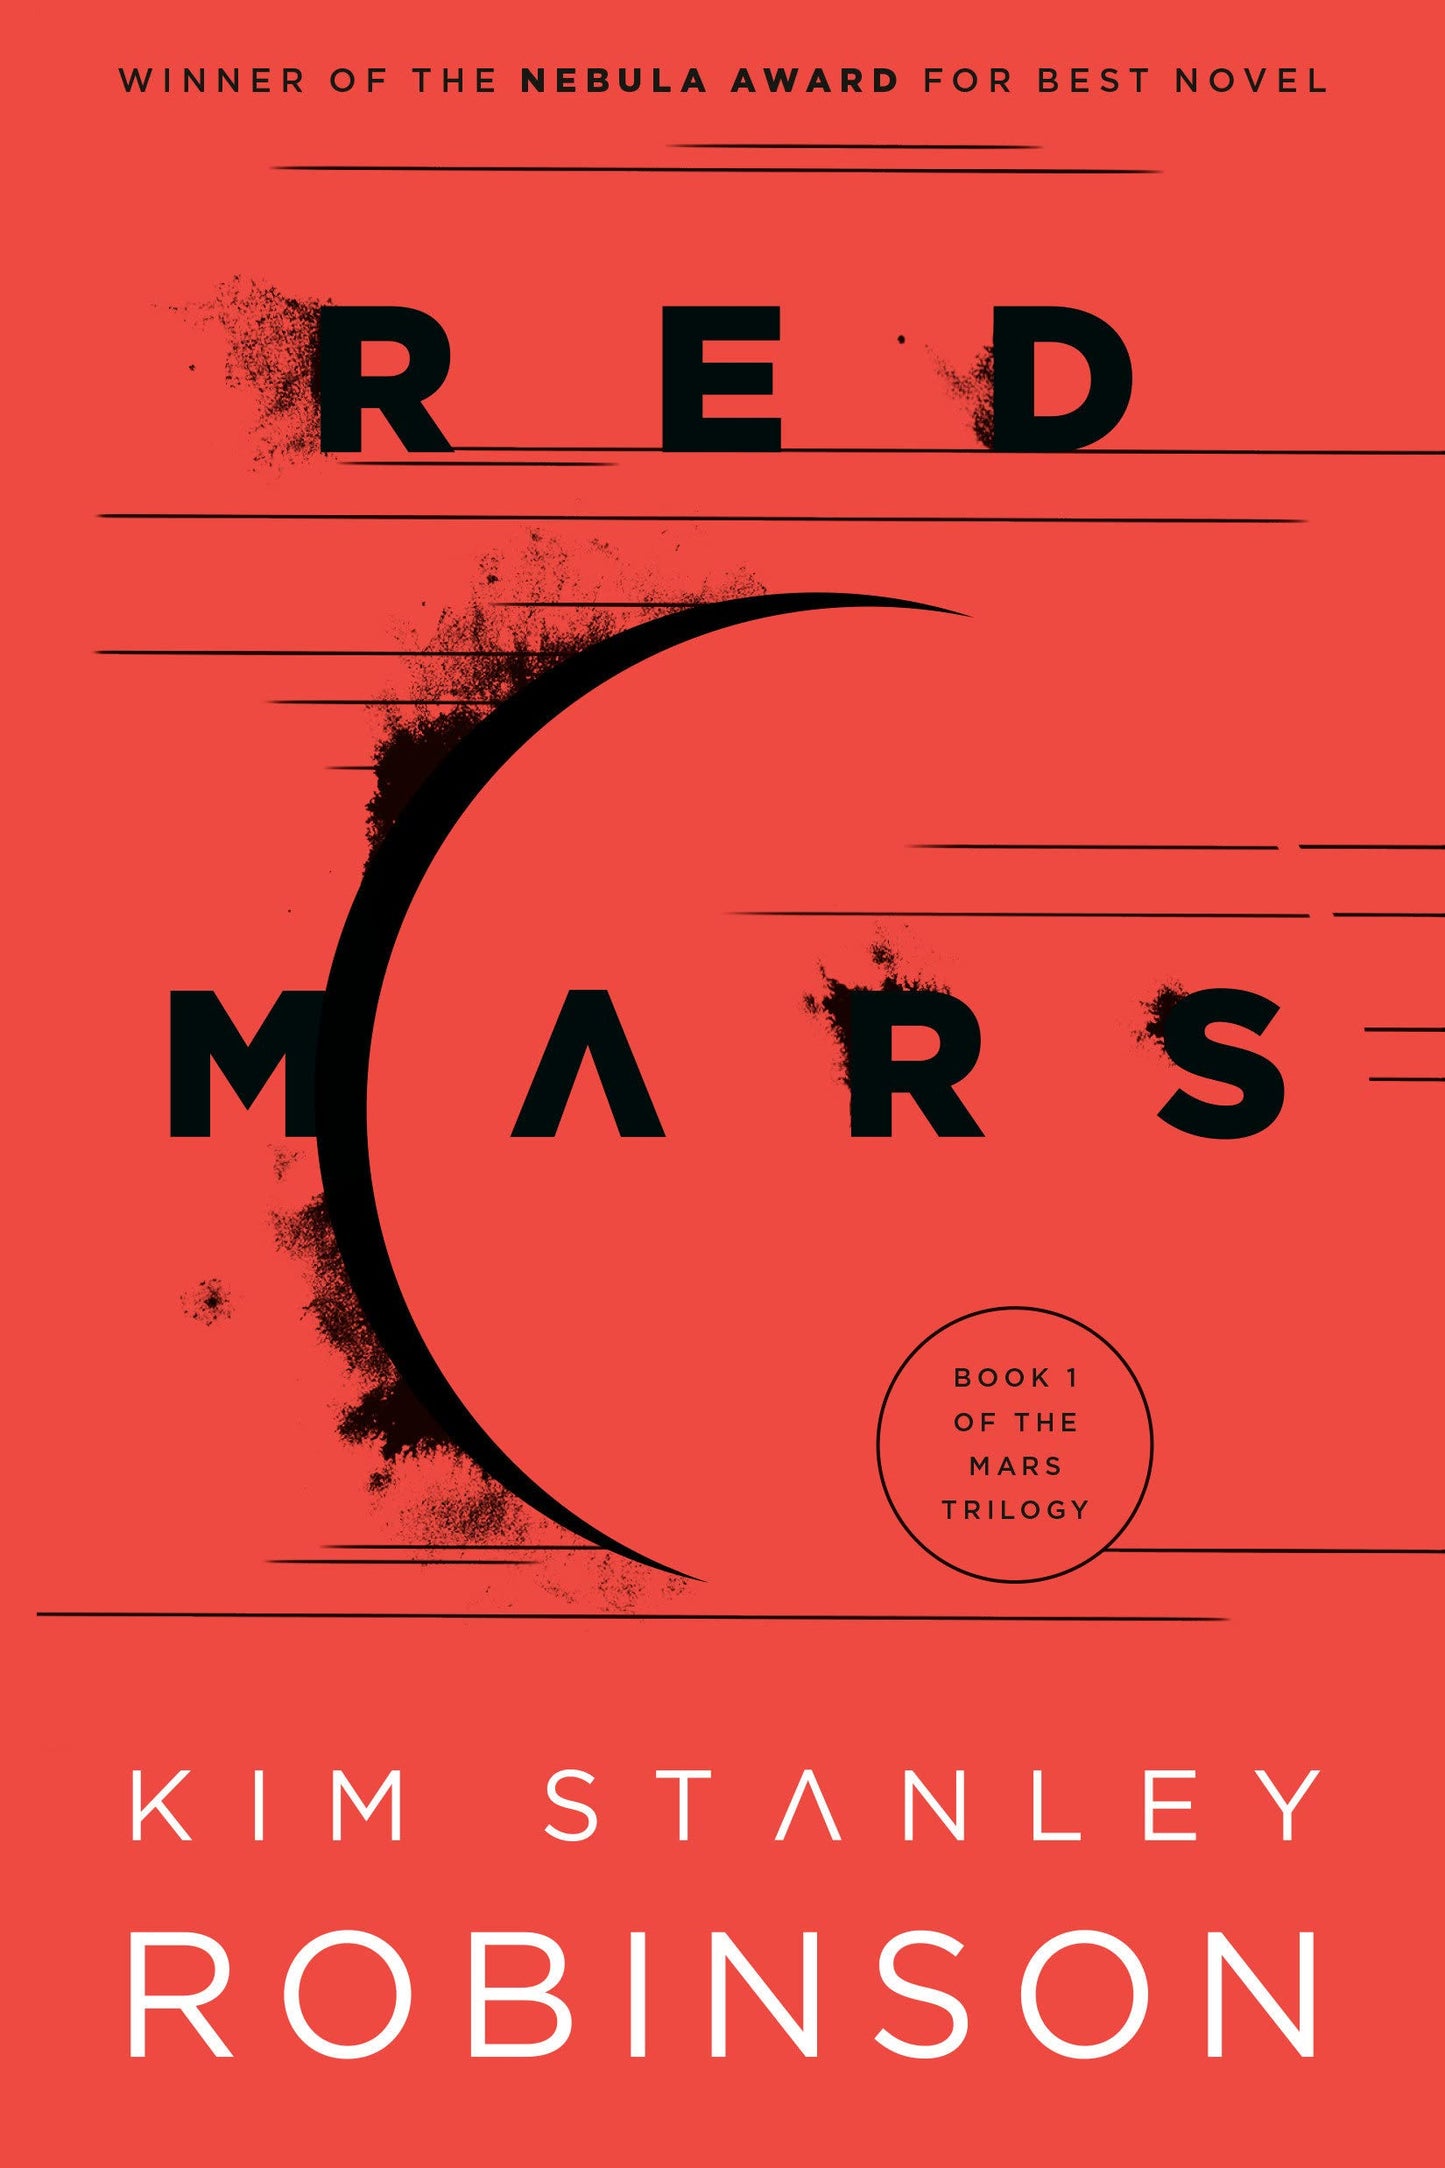 Red Mars, by Kim Stanley Robinson